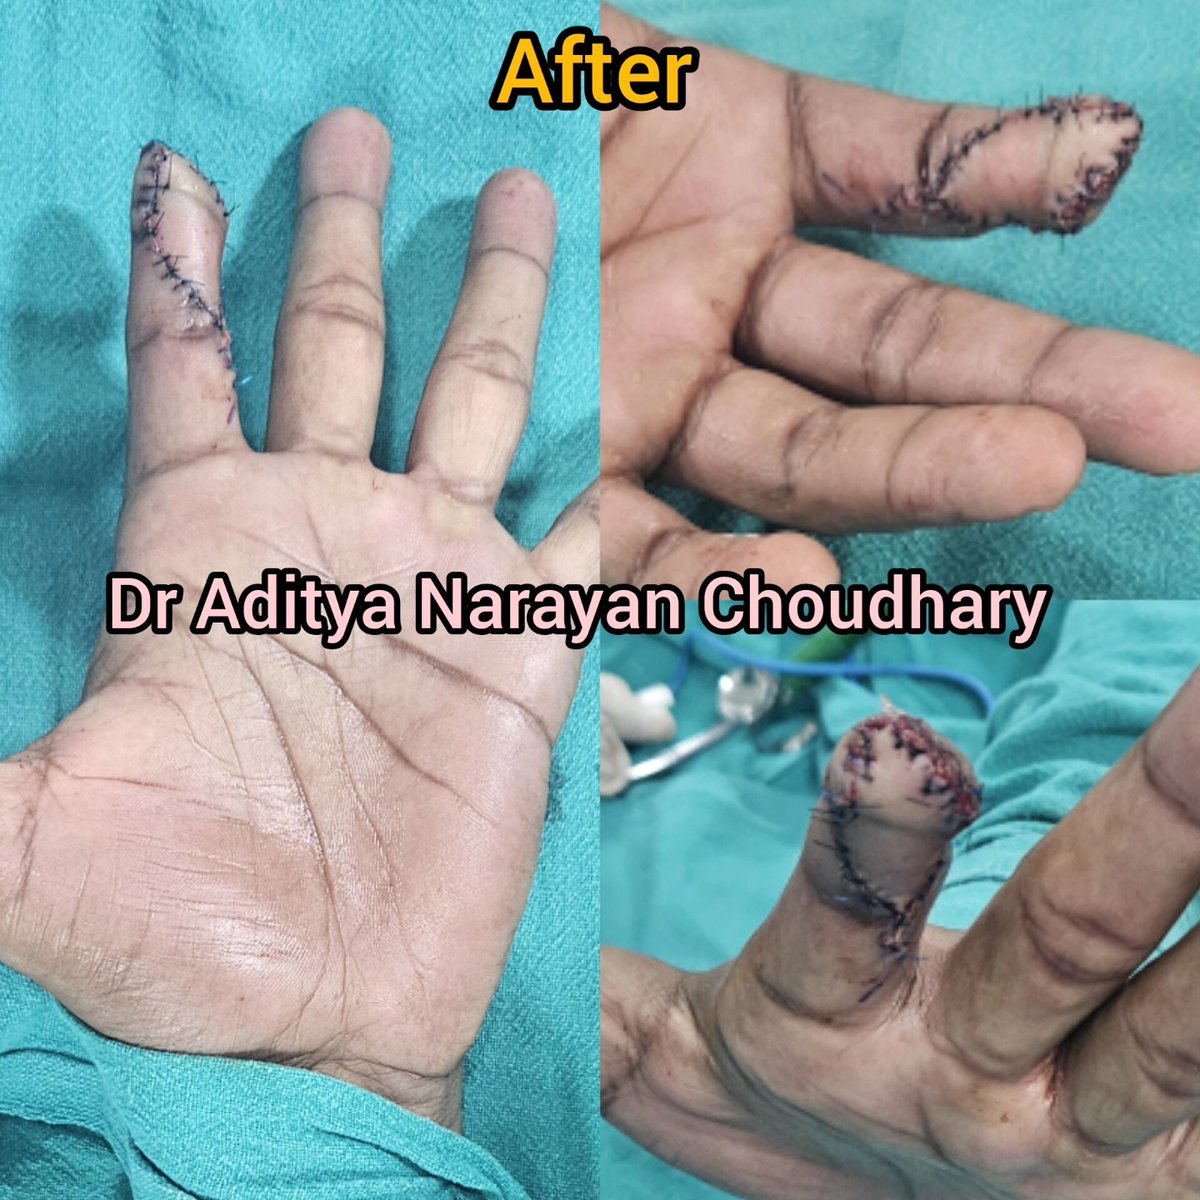 Performed an oblique triangular neurovascular homodigital island flap to address distal transection in the index finger. 🌟 Restoring function and aesthetics, one procedure at a time. #PlasticSurgery #HandReconstruction #MedicalMilestones #reconstructivesurgery #flaps